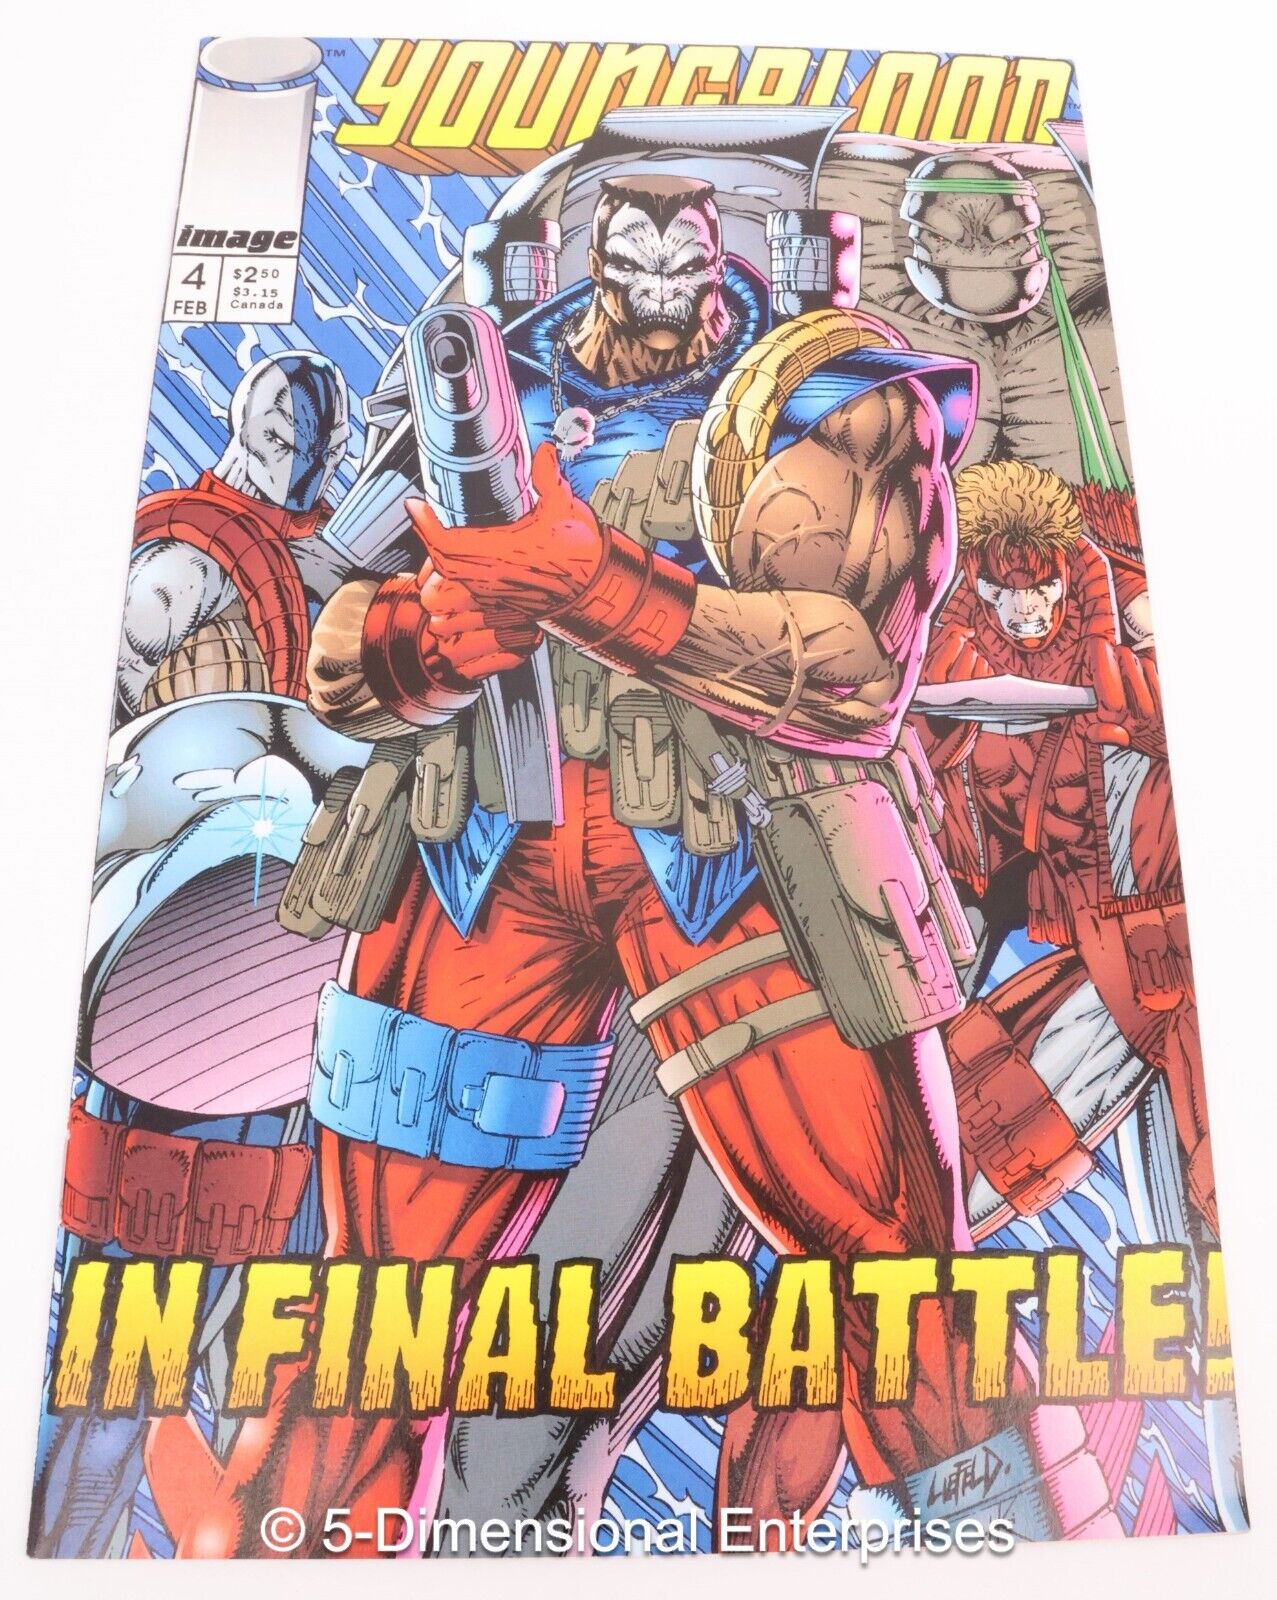 YOUNGBLOOD In Final Battle #4 (Feb 1992 1st Series) Image Comics Bagged Boarded